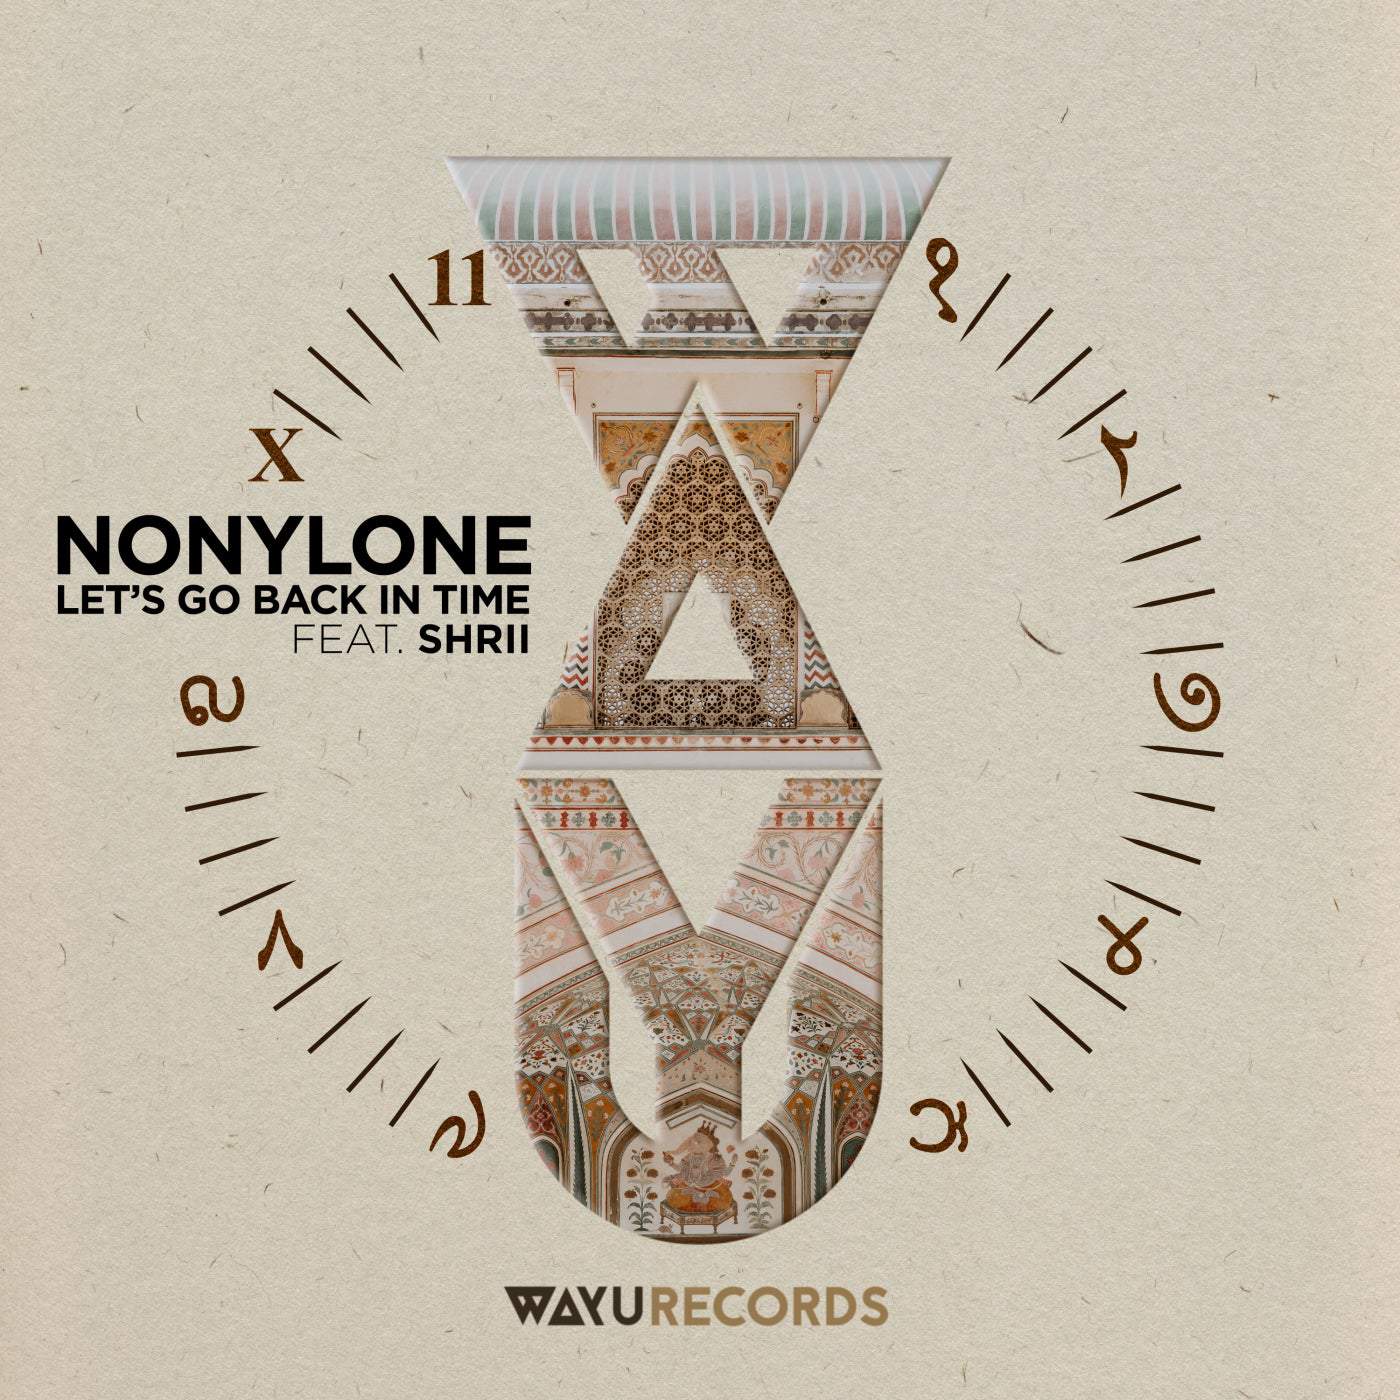 Download Shrii, Nonylone - Let's Go Back in Time on Electrobuzz